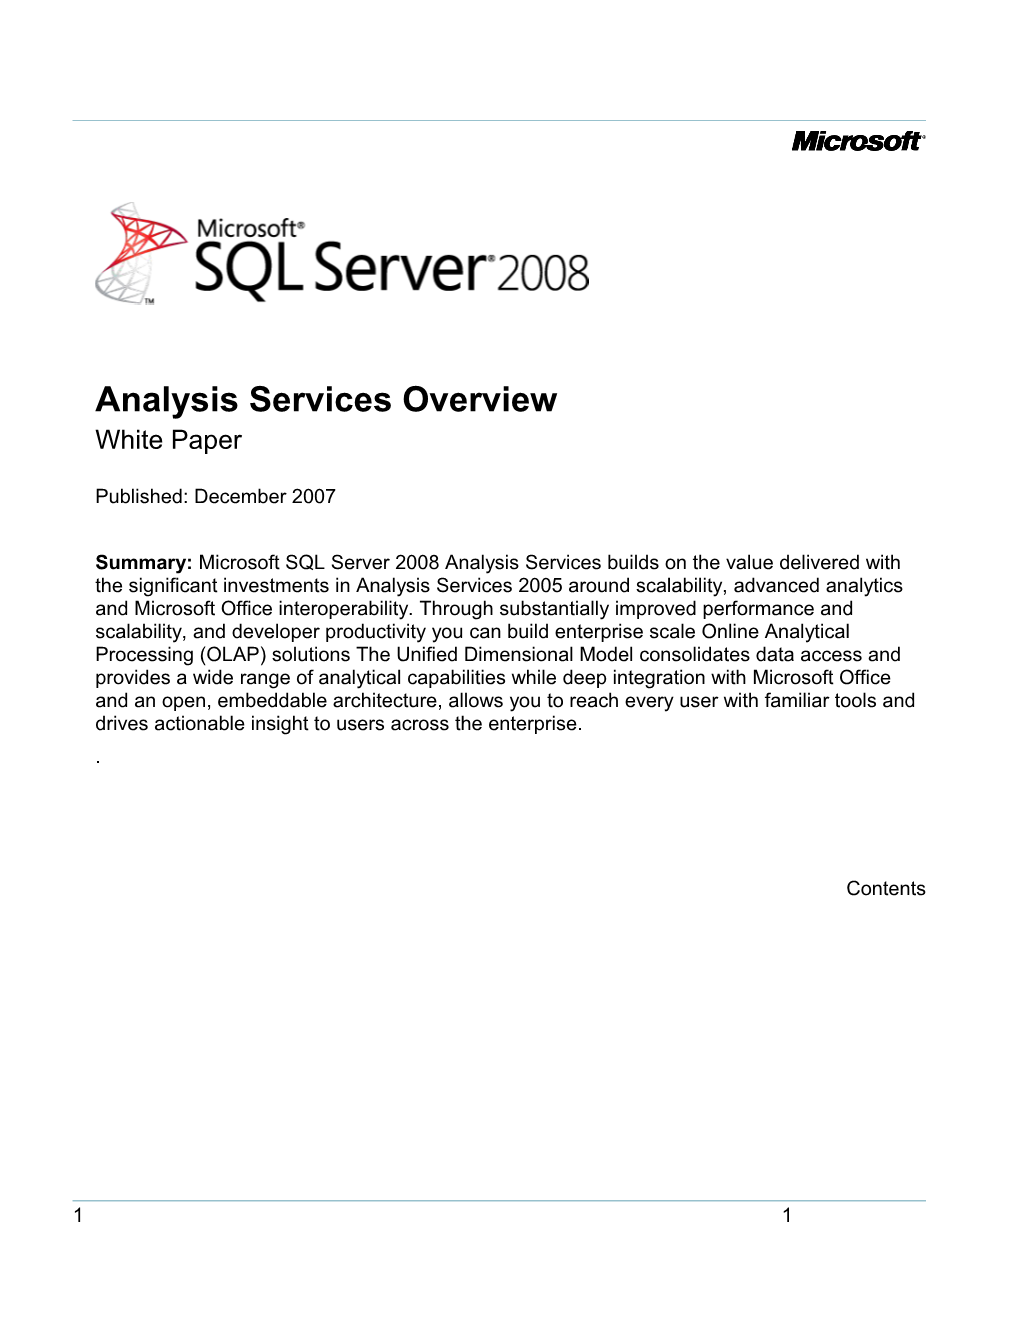 Analysis Services Overview